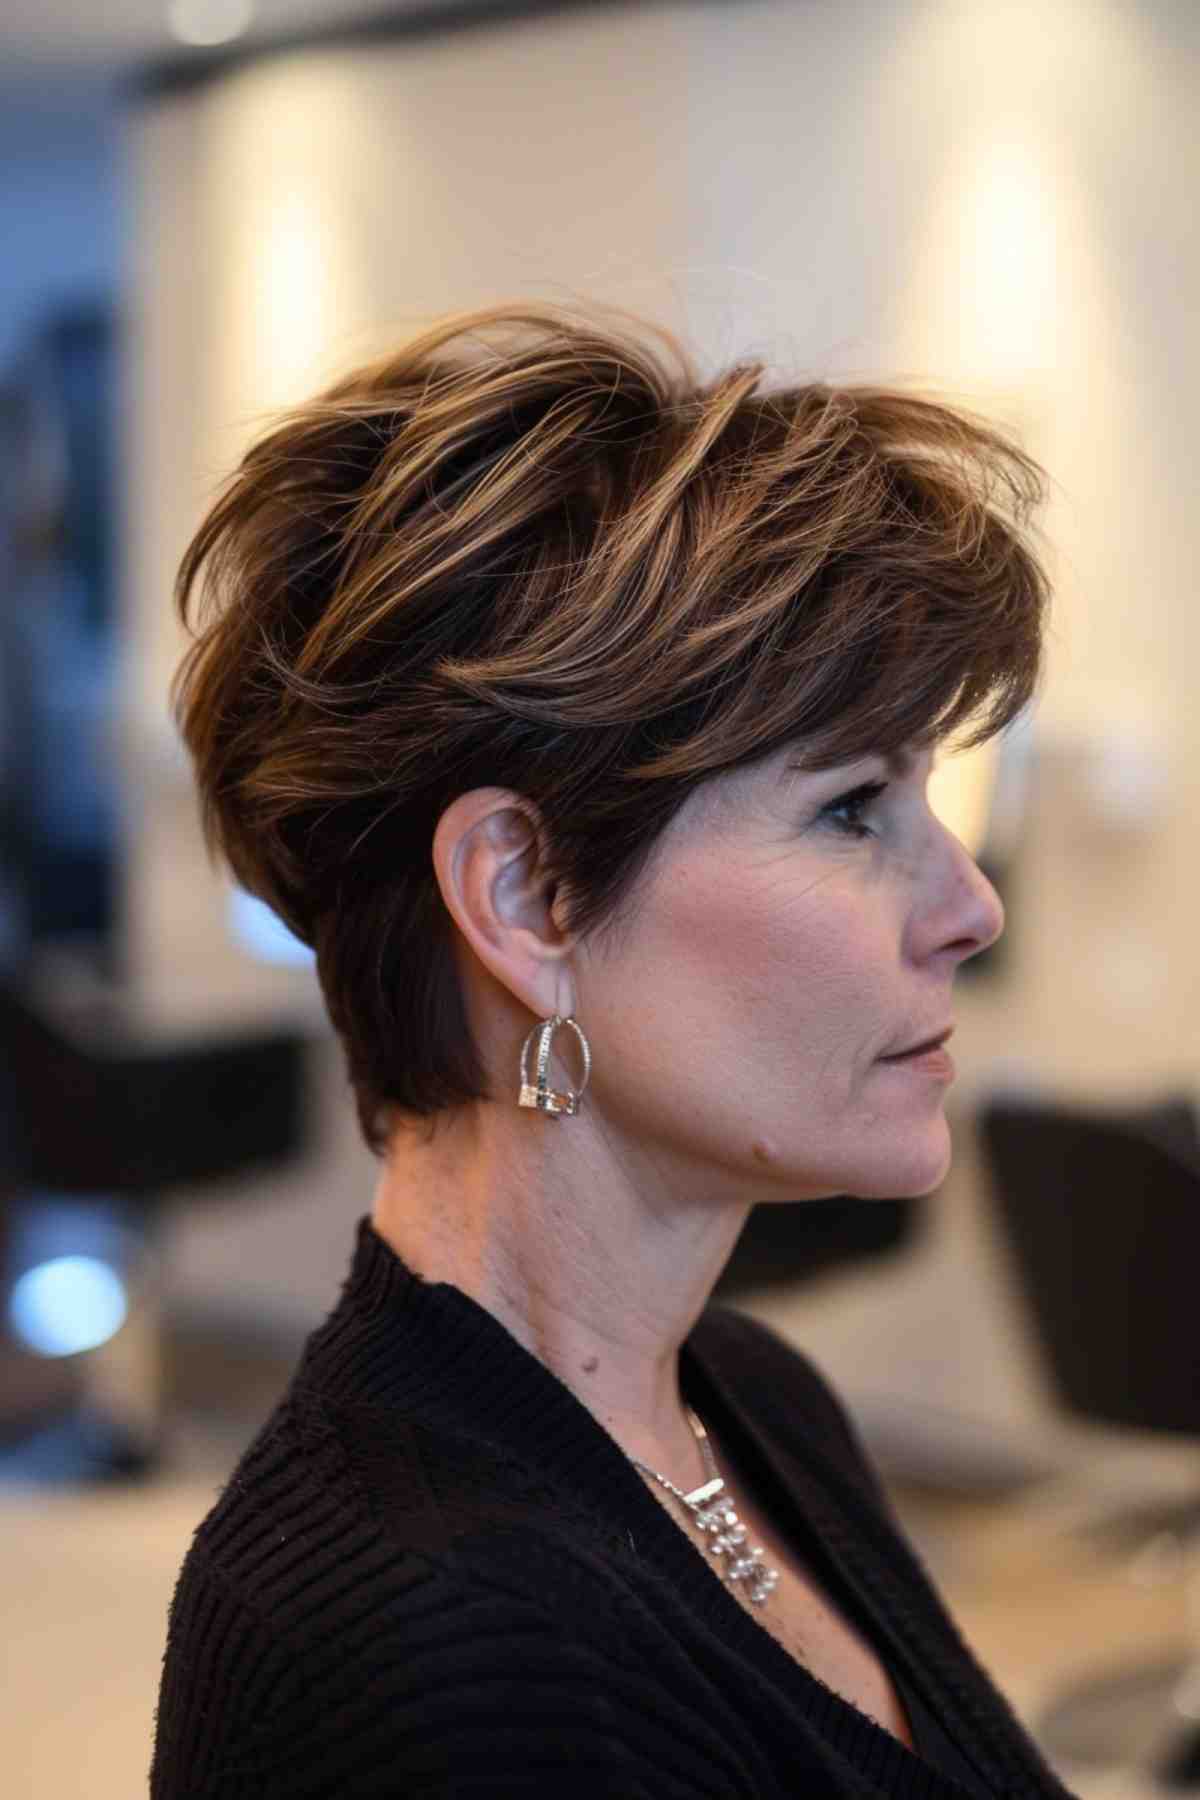 Short Textured Layered Hairstyle with Brown Partial Balayage for Mature Woman